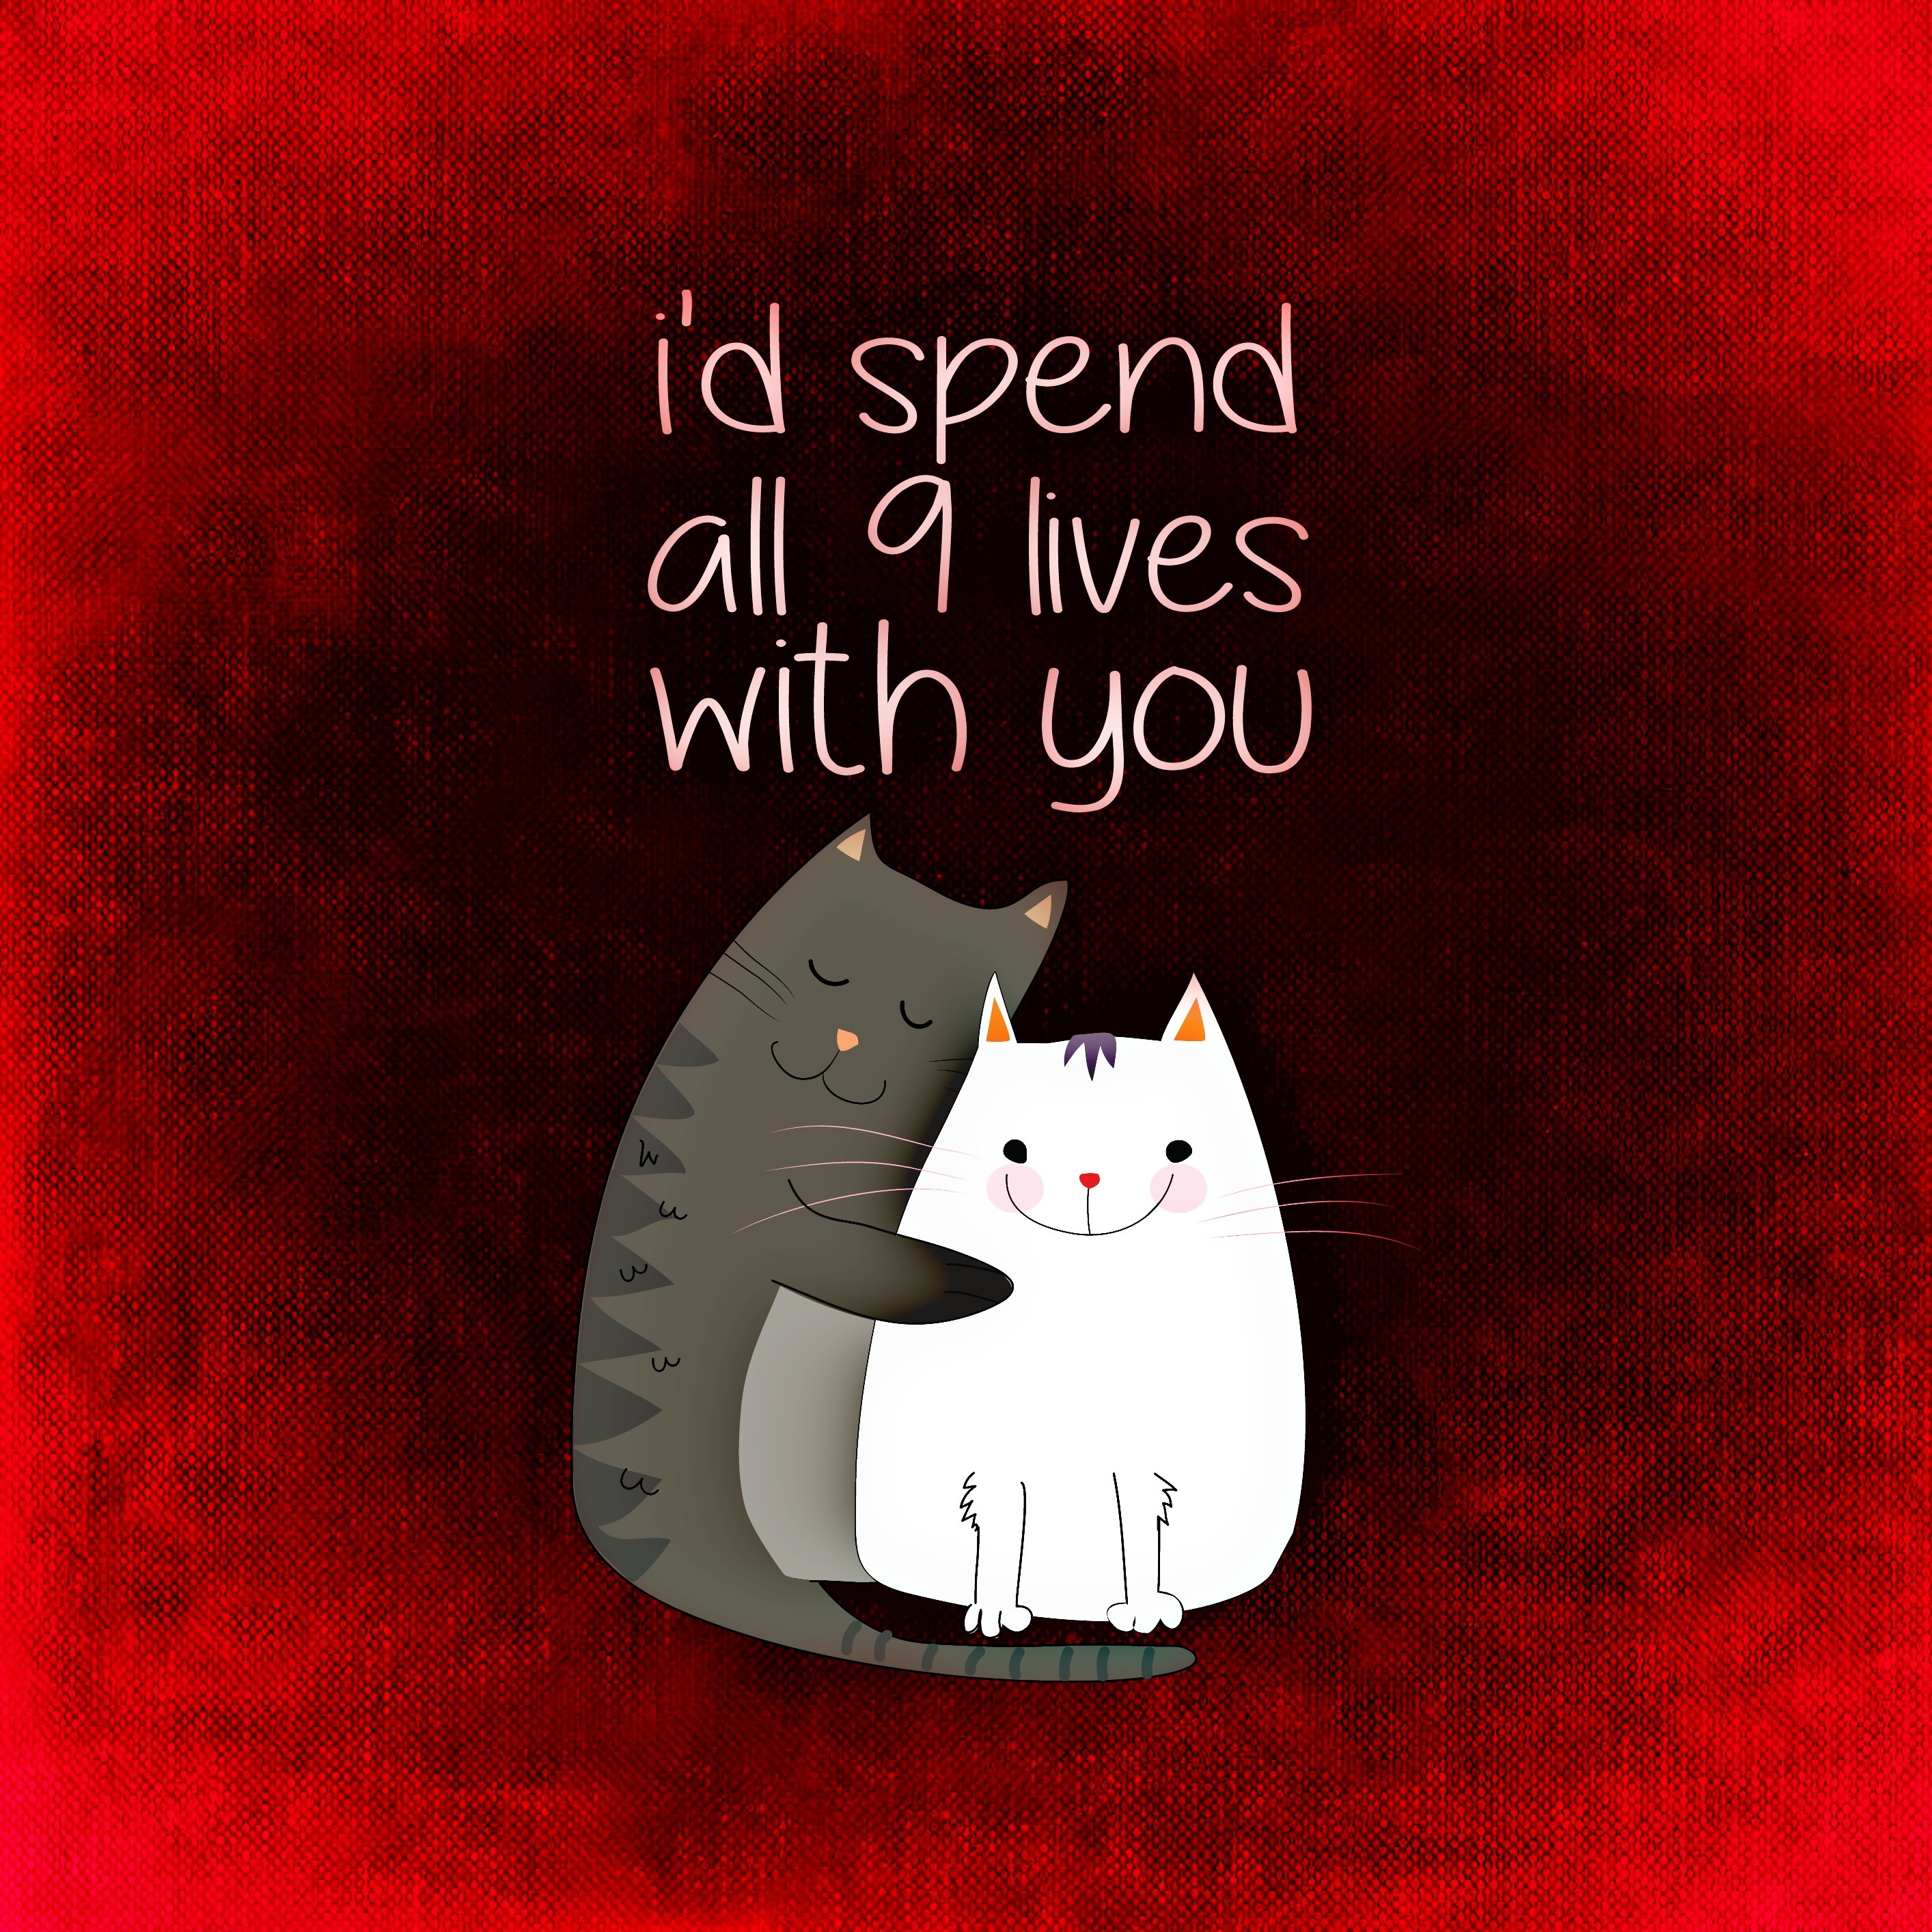 126744 download wallpaper cats, love, inscription, romance, confession, postcard screensavers and pictures for free